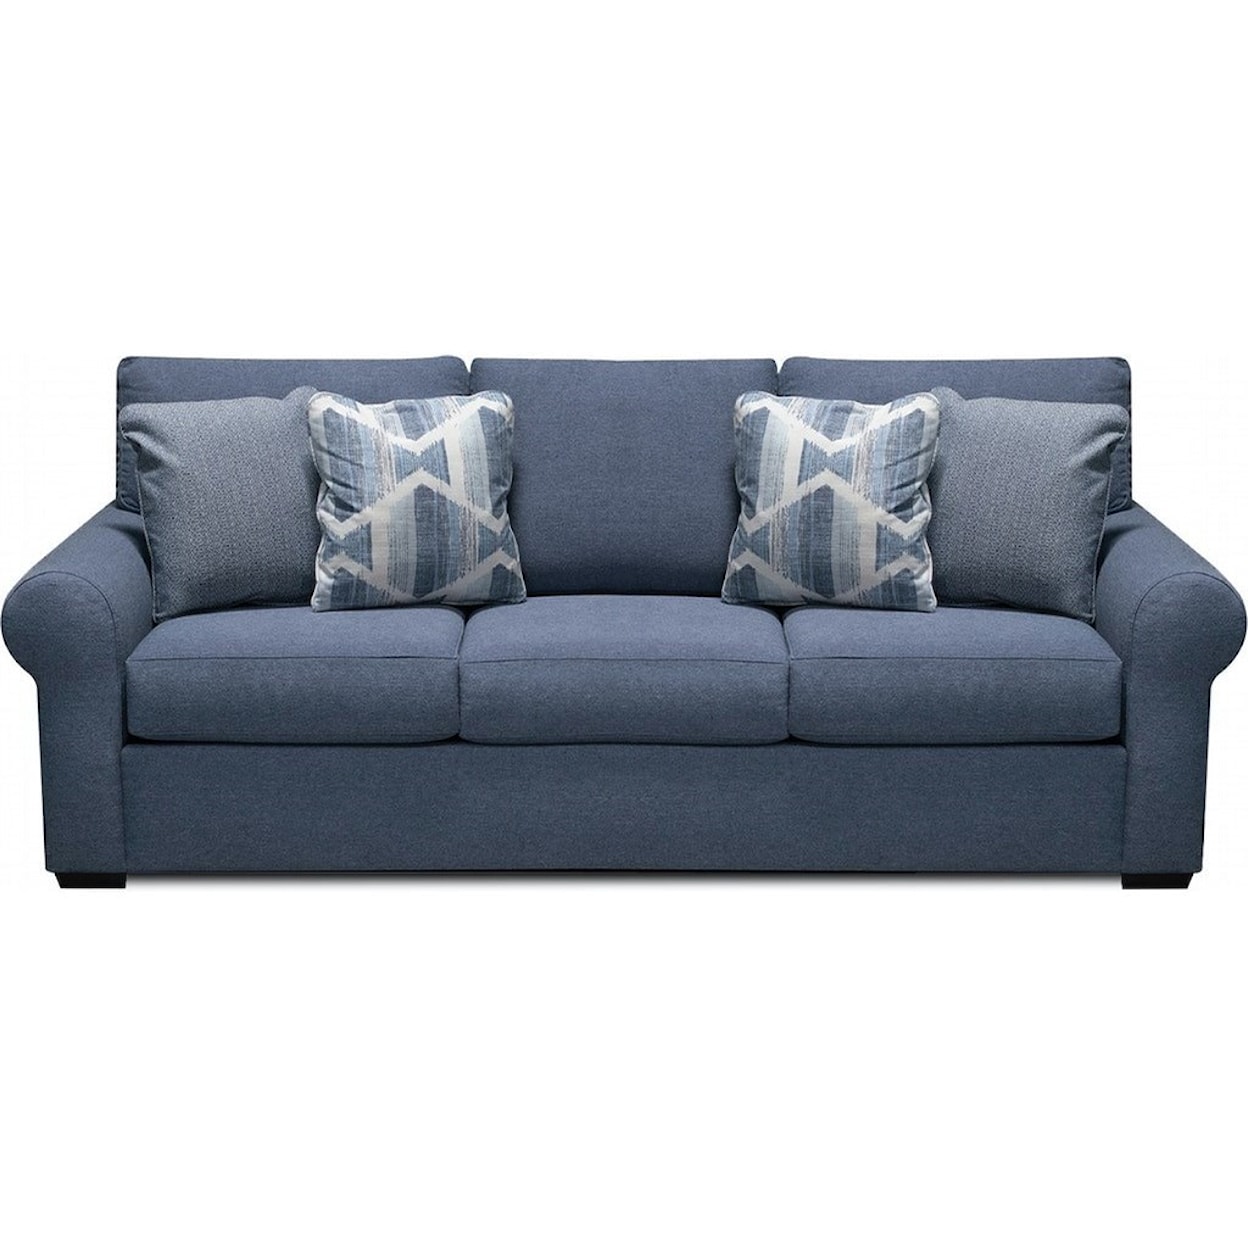 England 2650 Series Sofa with Drop Down Tray